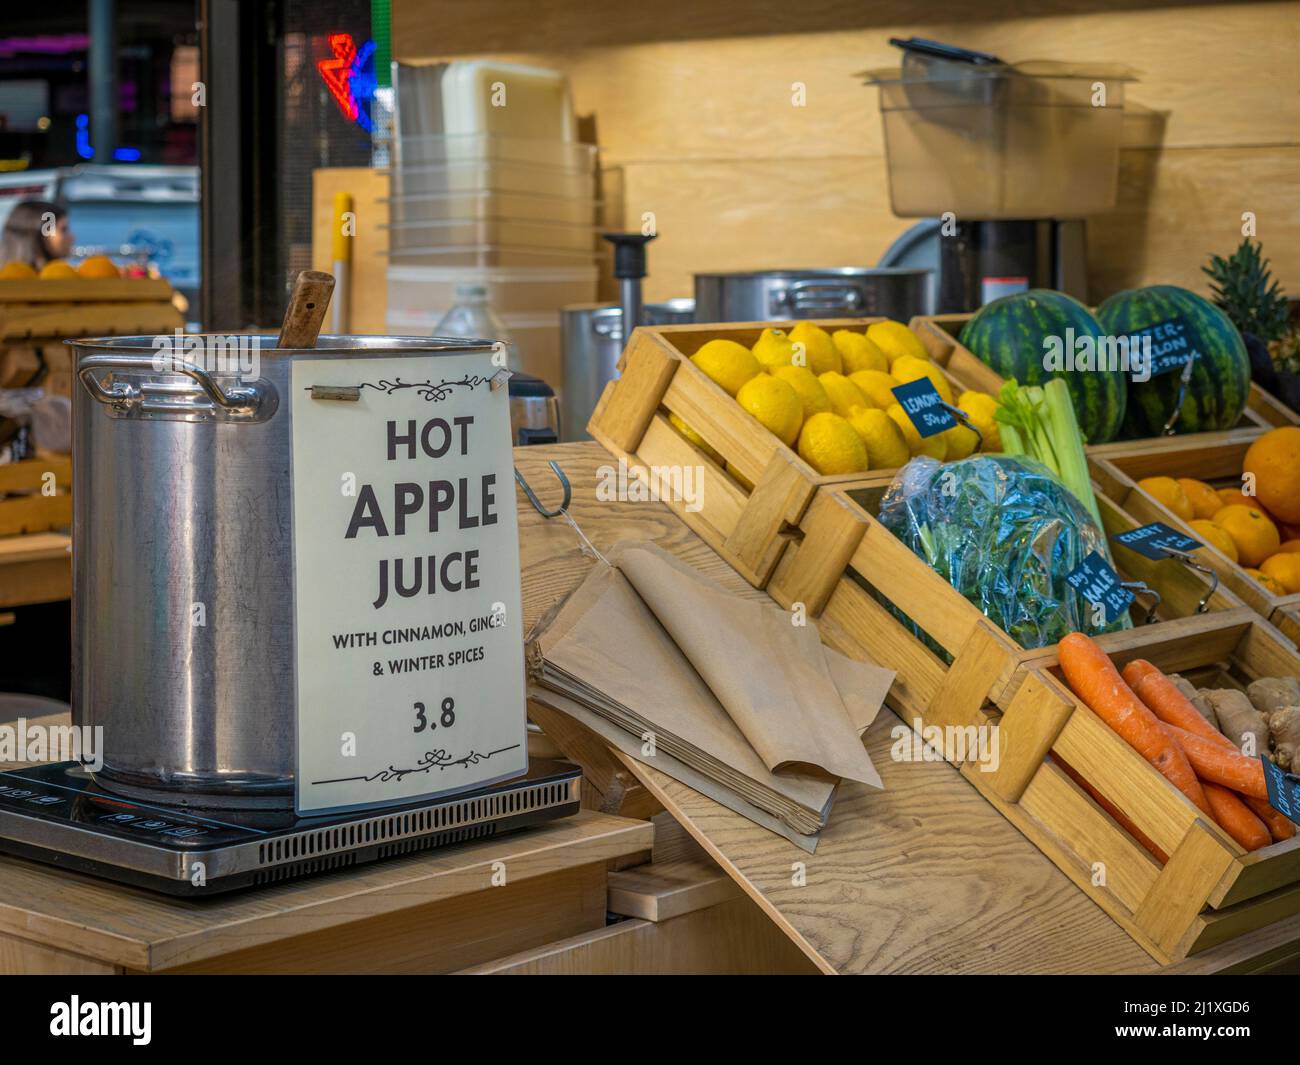 https://c8.alamy.com/comp/2J1XGD6/large-pan-of-hot-apple-juice-for-sale-on-a-fruit-and-vegetable-stall-in-spitalfields-market-london-2J1XGD6.jpg